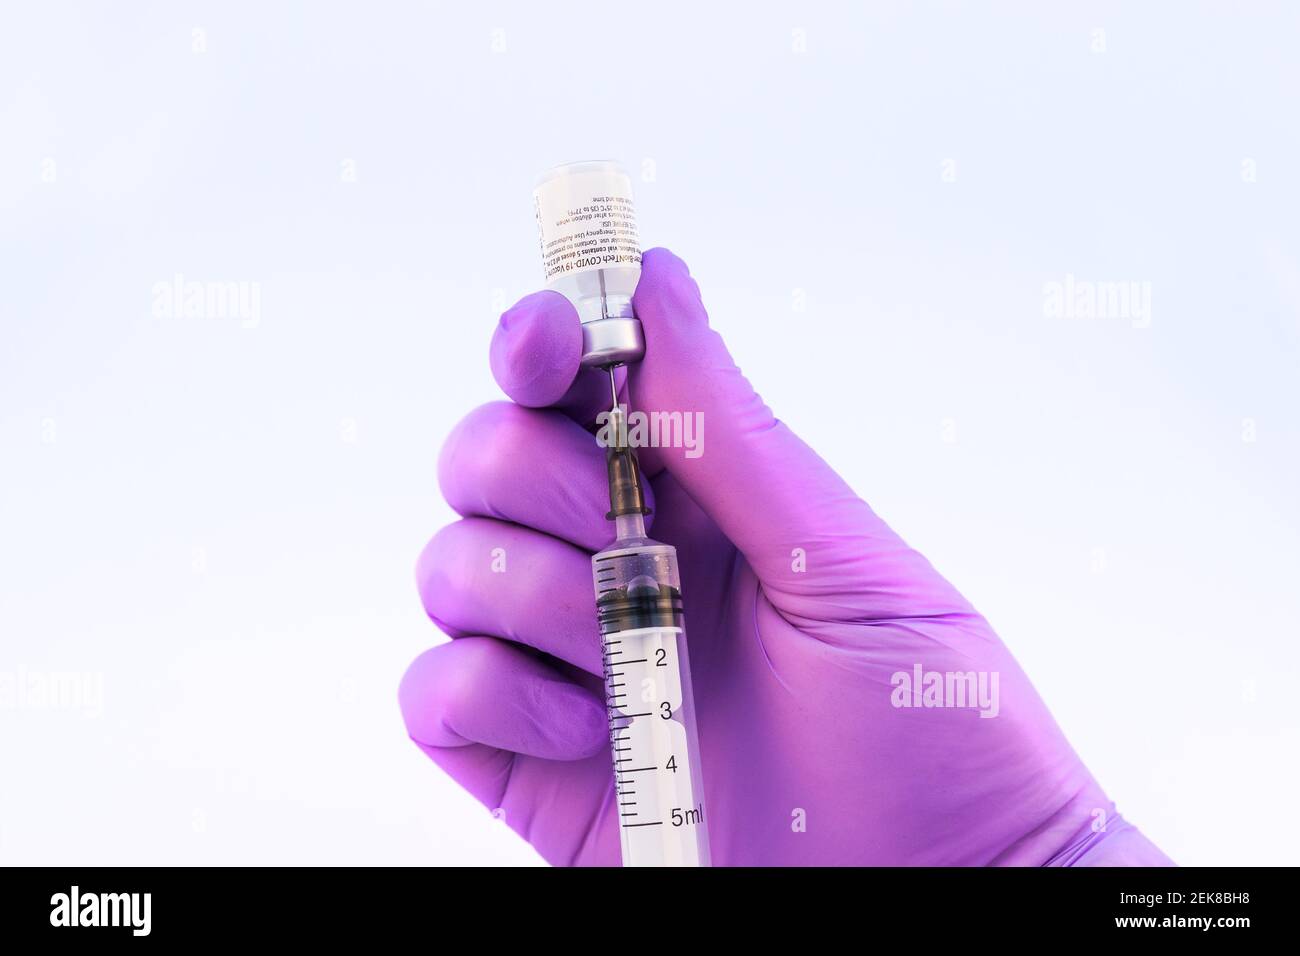 Brasov, Romania - February 21, 2021: Doctor using Pfizer-BioNTech Covid-19 vaccine on a white background. Stock Photo